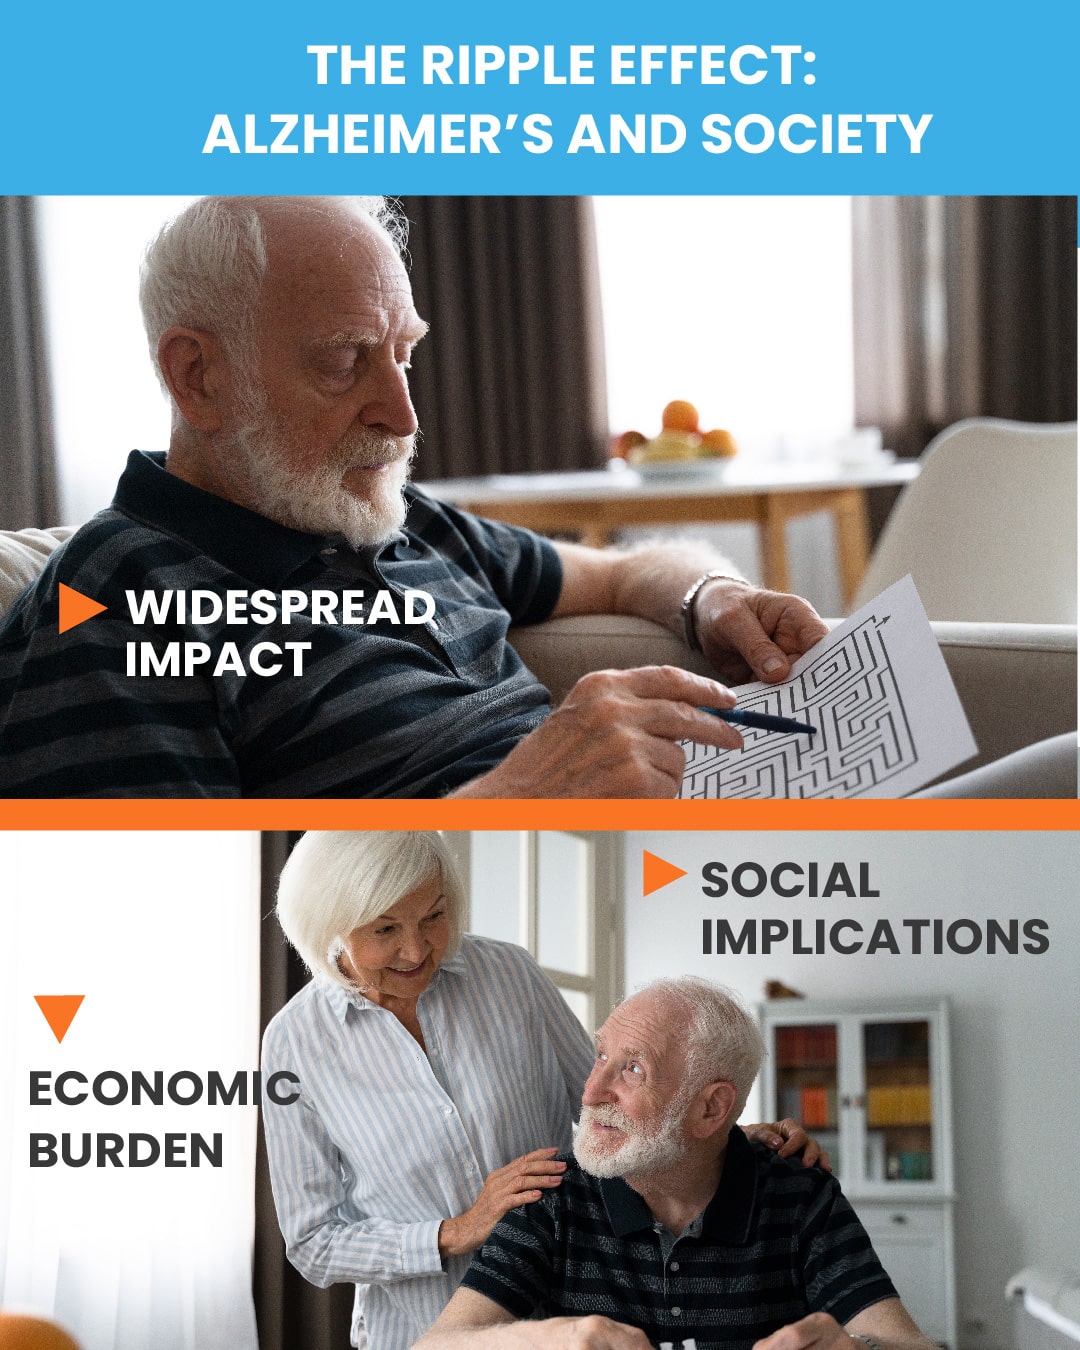 Tri-sectioned image featuring titles 'The Ripple Effect: Alzheimer’s and Society', 'Widespread Impact', 'Social Implications', and 'Economic Burden', depicting elderly individuals engaged in activities and interactions